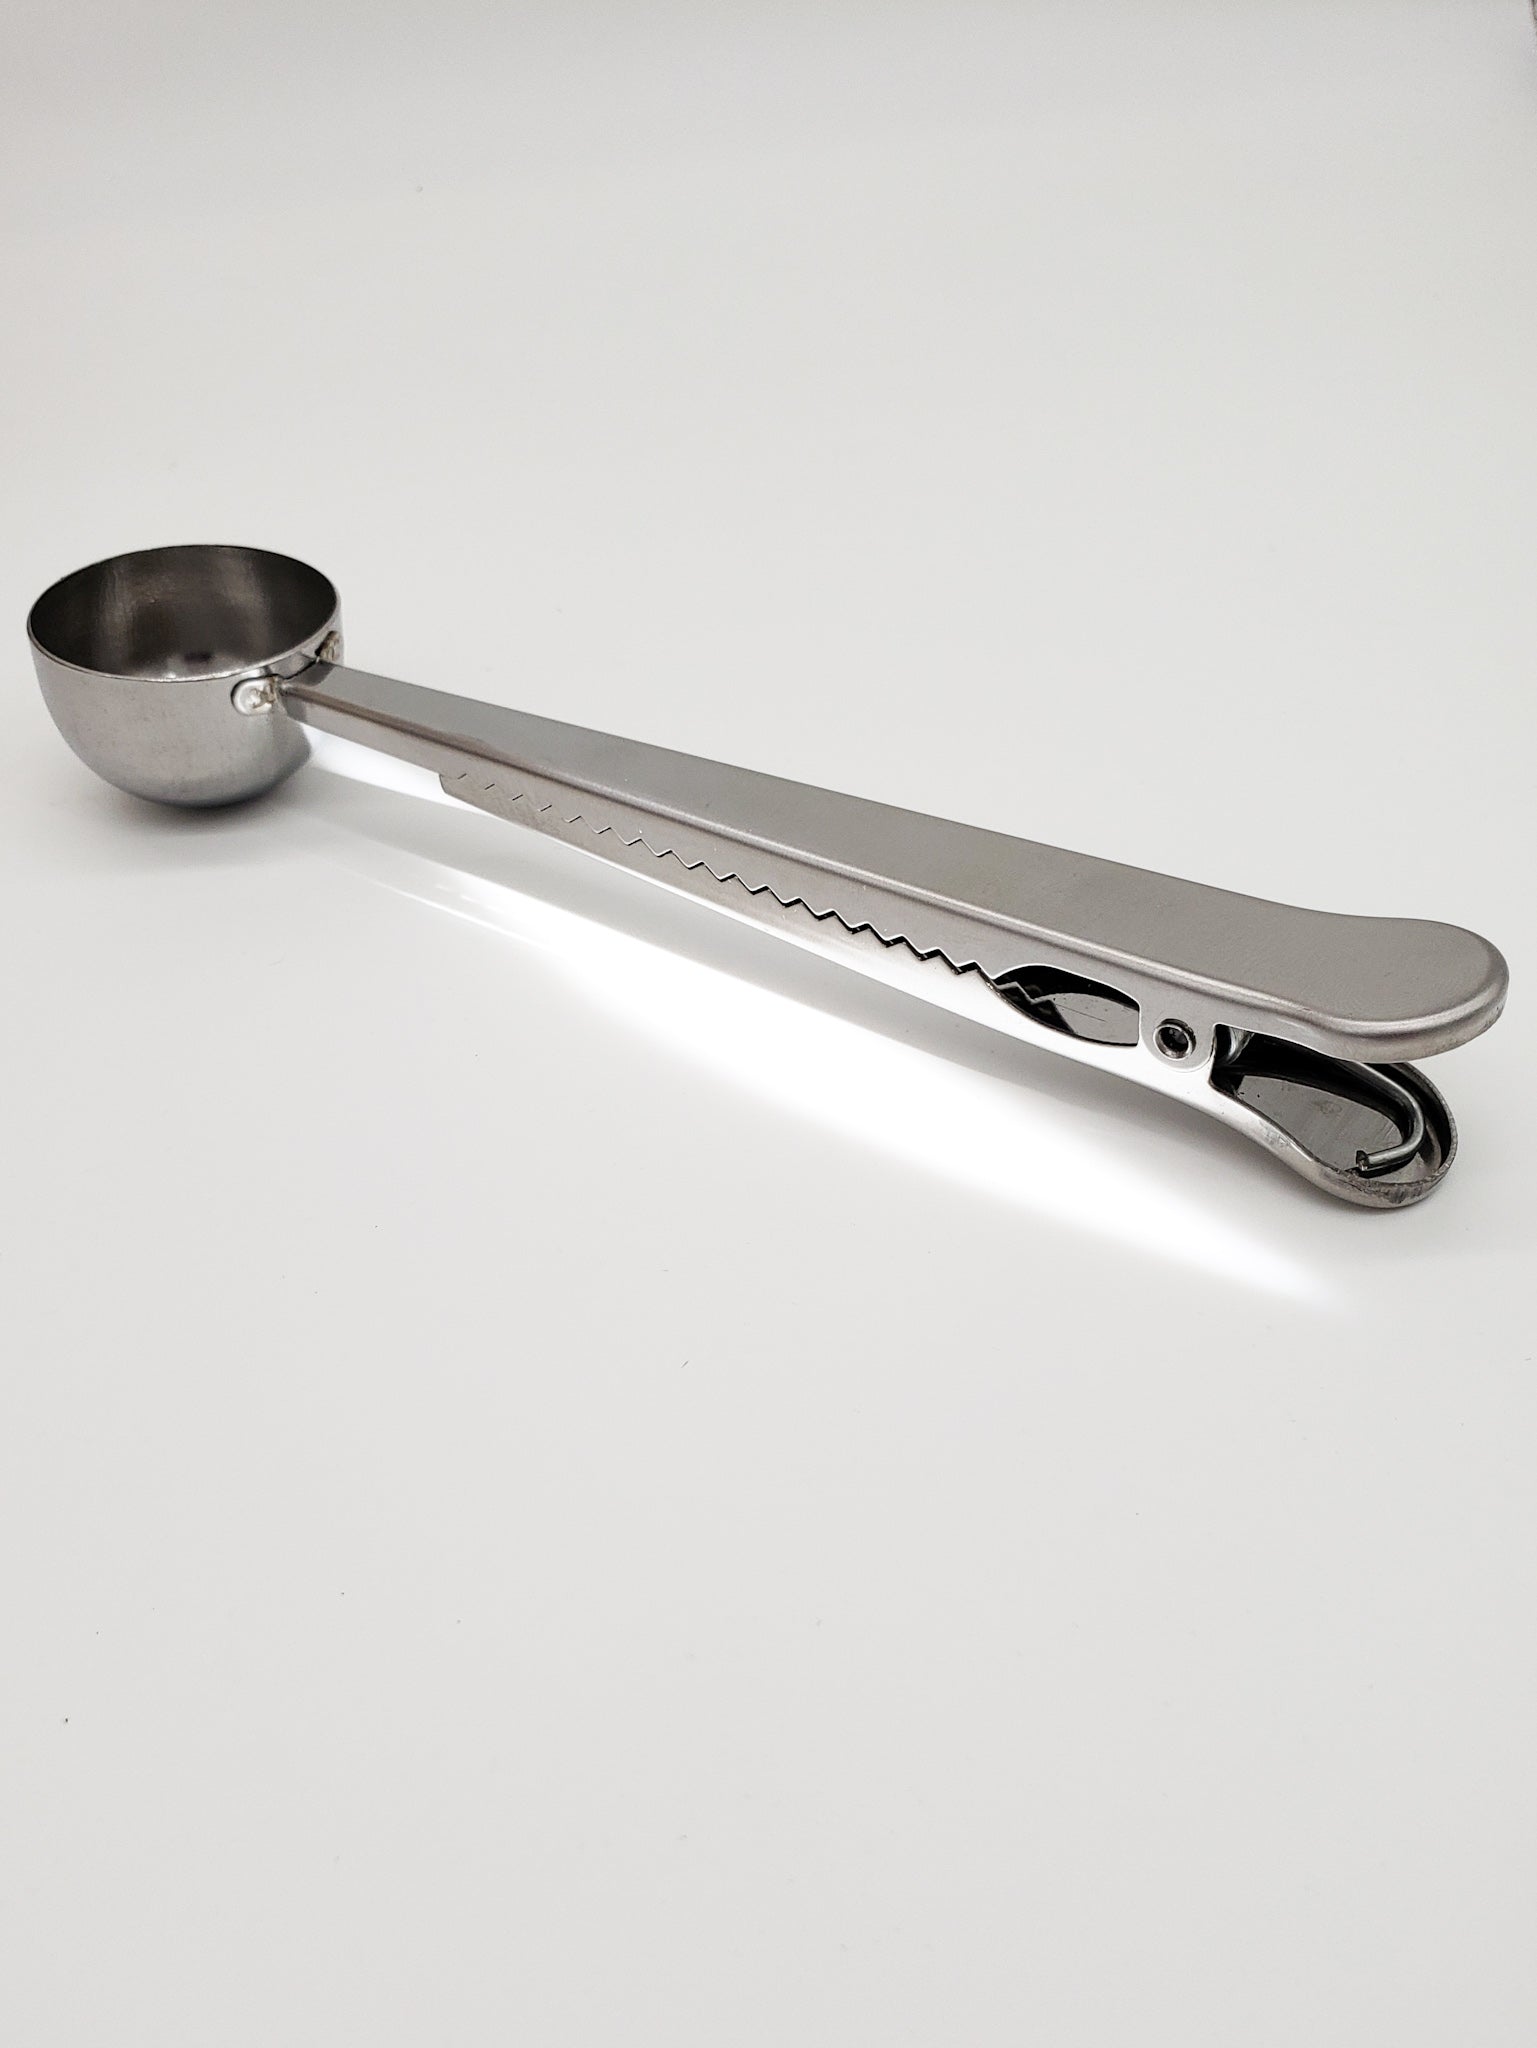 Coffee gator clip spoon. A metallic spoon with an approximately 7 inch handle to reach down into coffee package.  The spoon is very deep and full round to easily scoop coffee and the handle is a clip with gator teeth to help close and clip your coffee package closed for freshness and convenience.